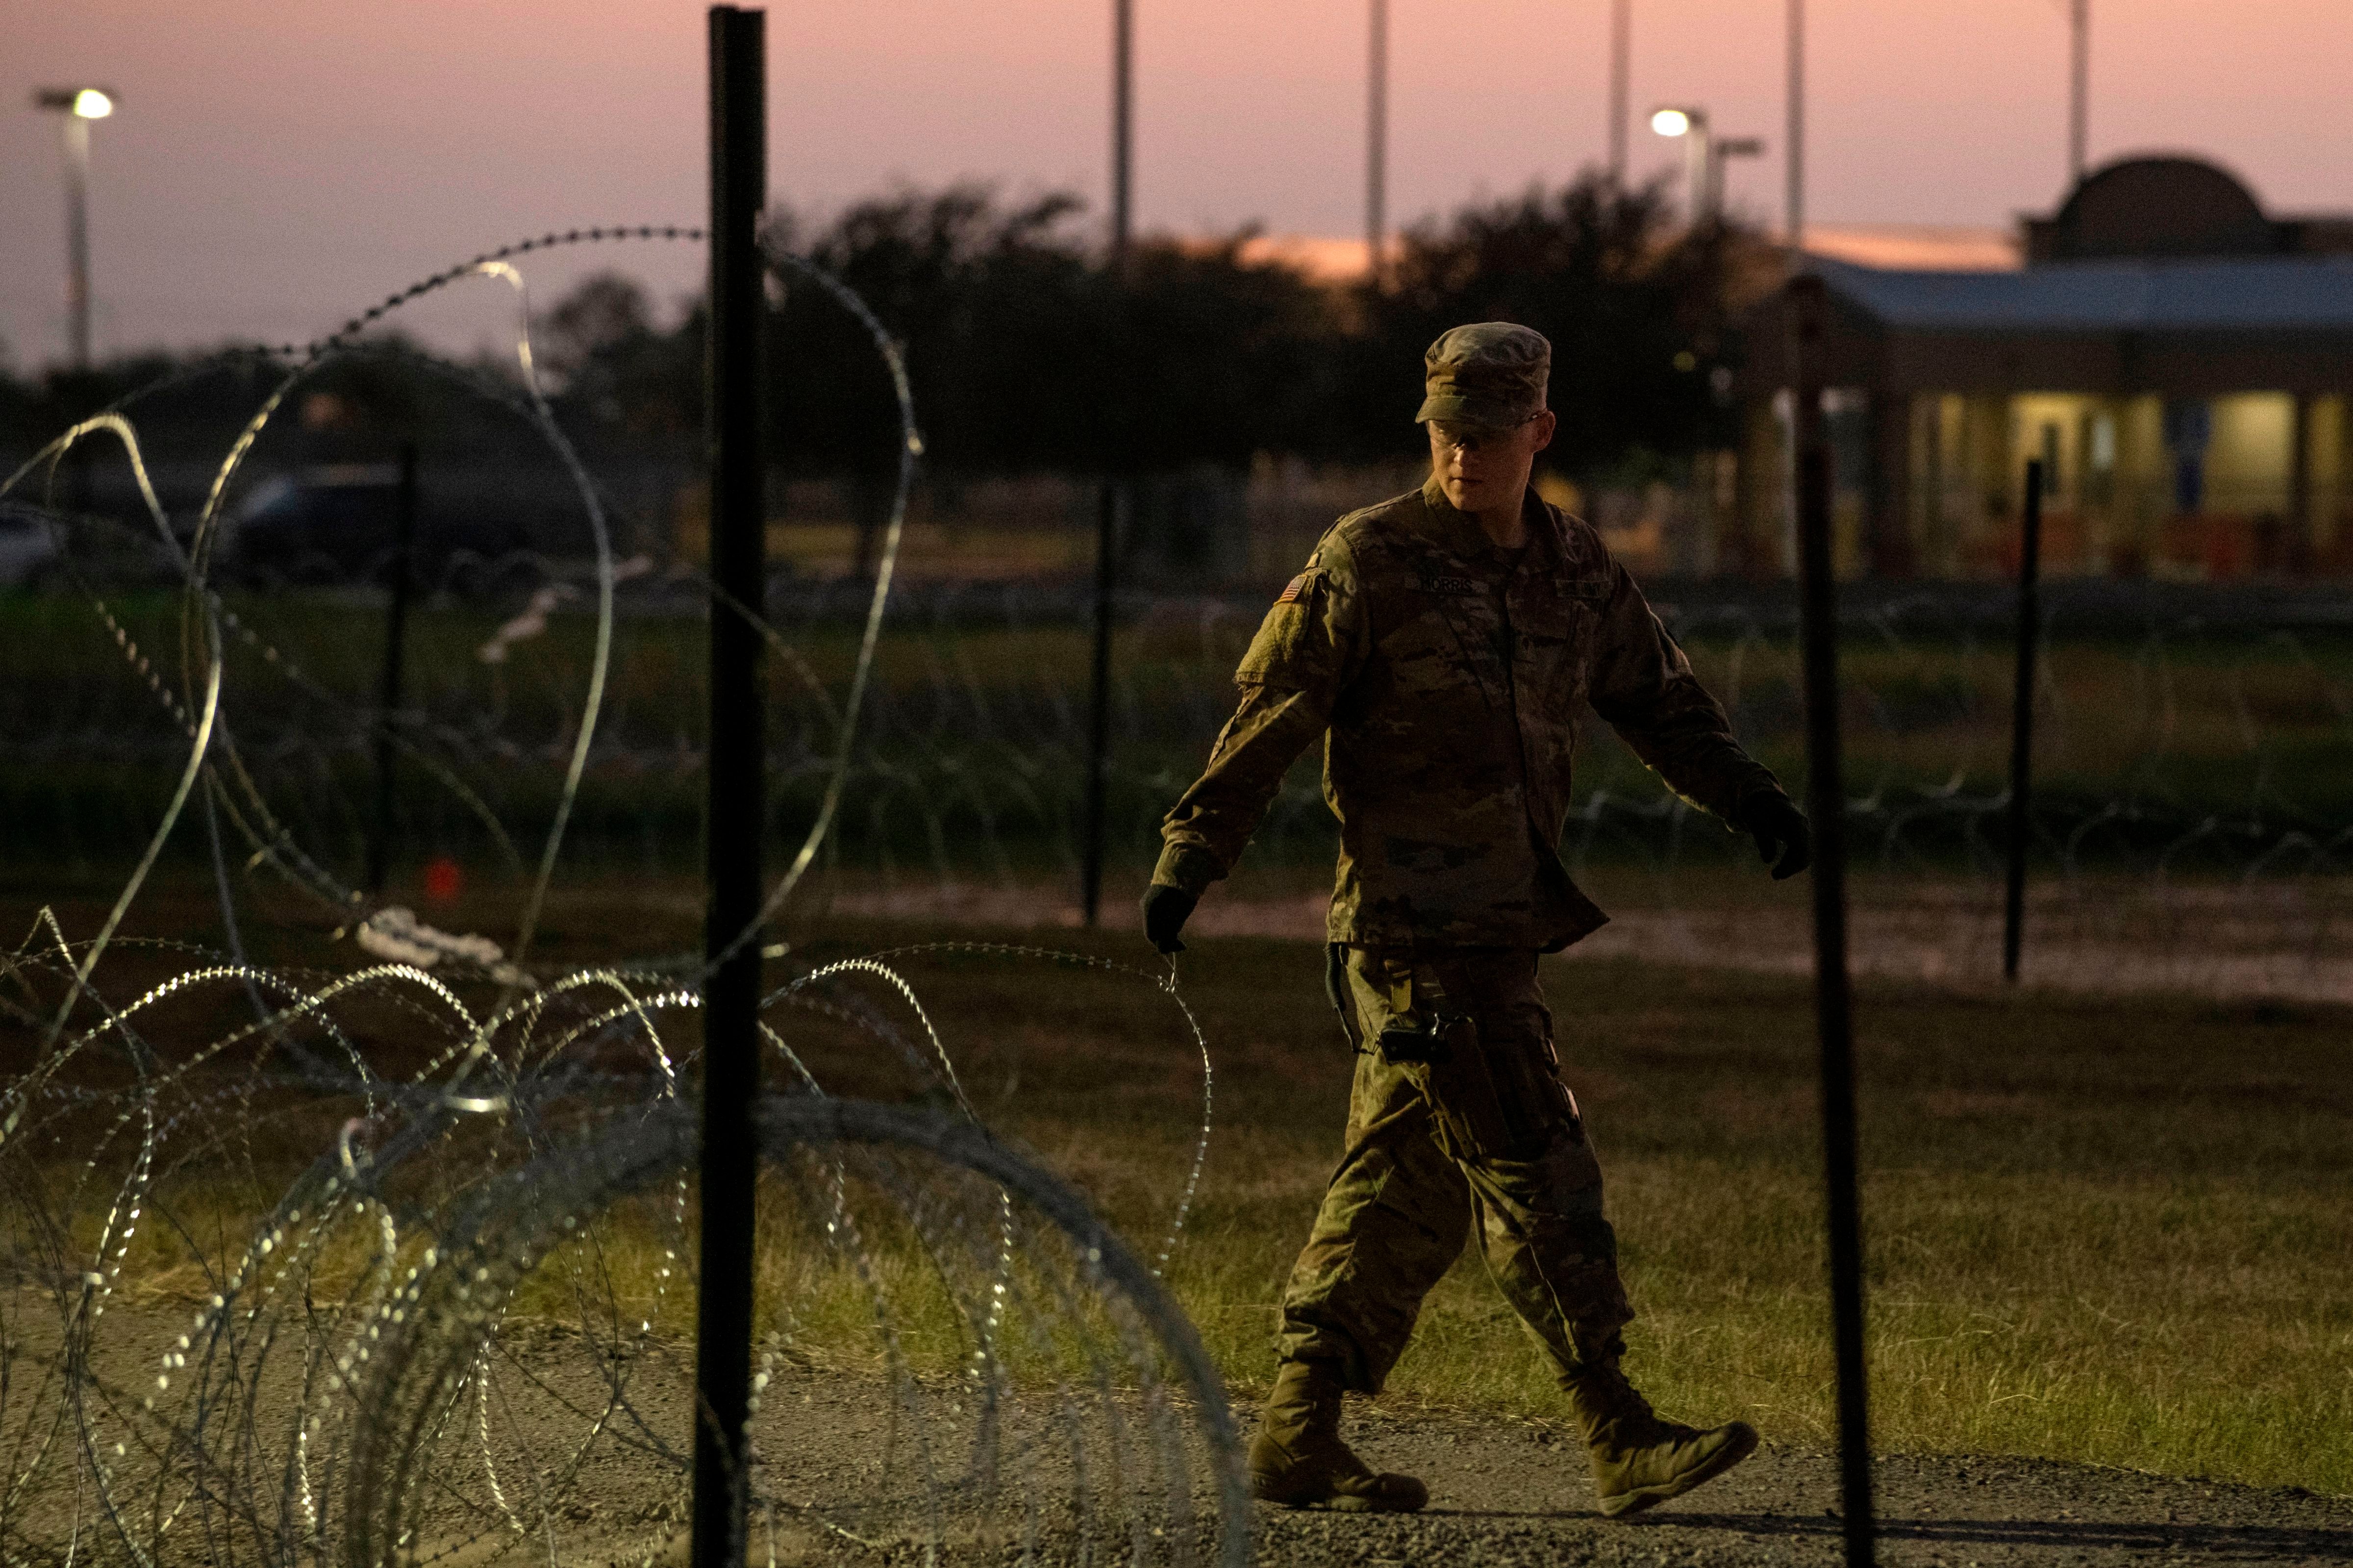 A US Army soldier closes a razor-wire gate at a compound where the military is erecting an encampment near the US-Mexico border crossing at Donna, Texas, on November 6, 2018. (ANDREW CULLEN&mdash;AFP/Getty Images)